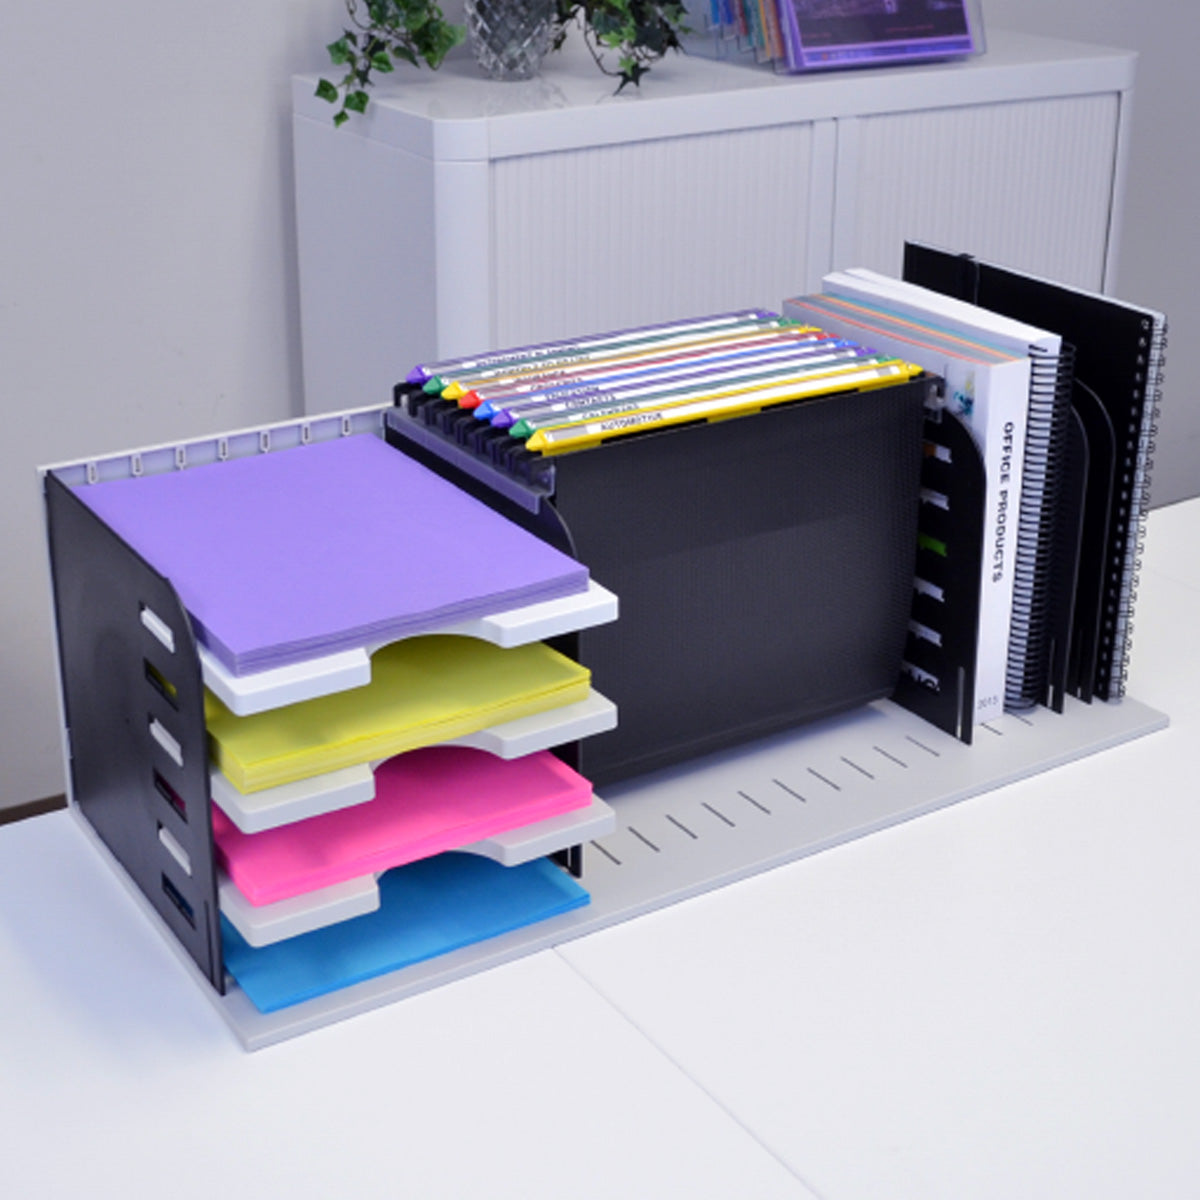 12 Paper-Tray Mobile Storage with or without Trays